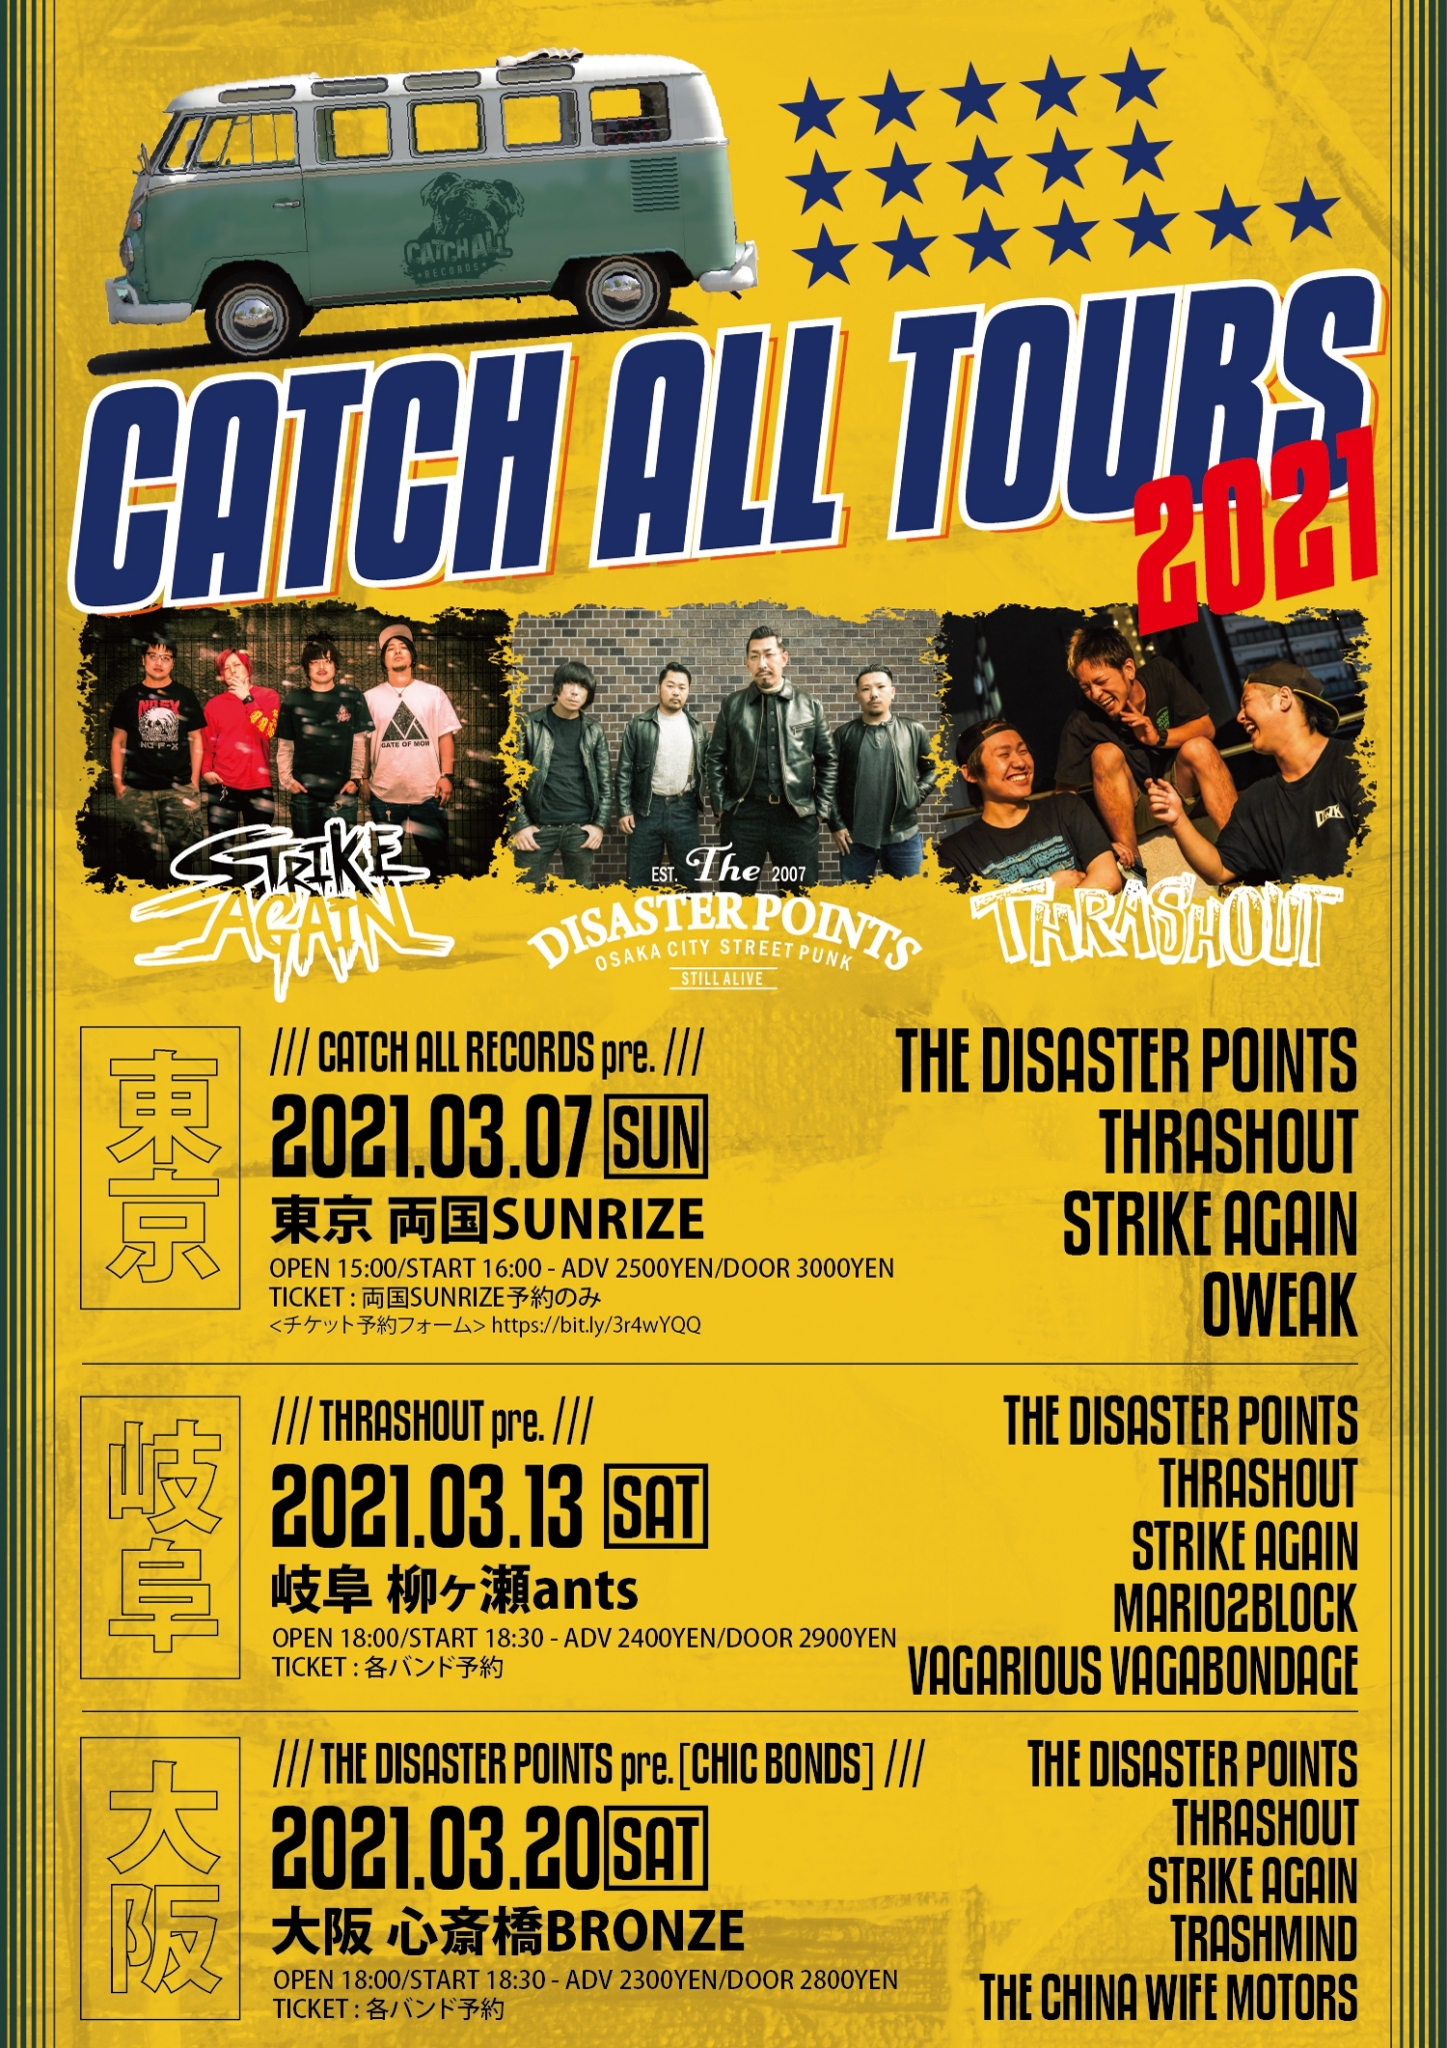 CATCH ALL TOURS 2021 〜岐阜編〜